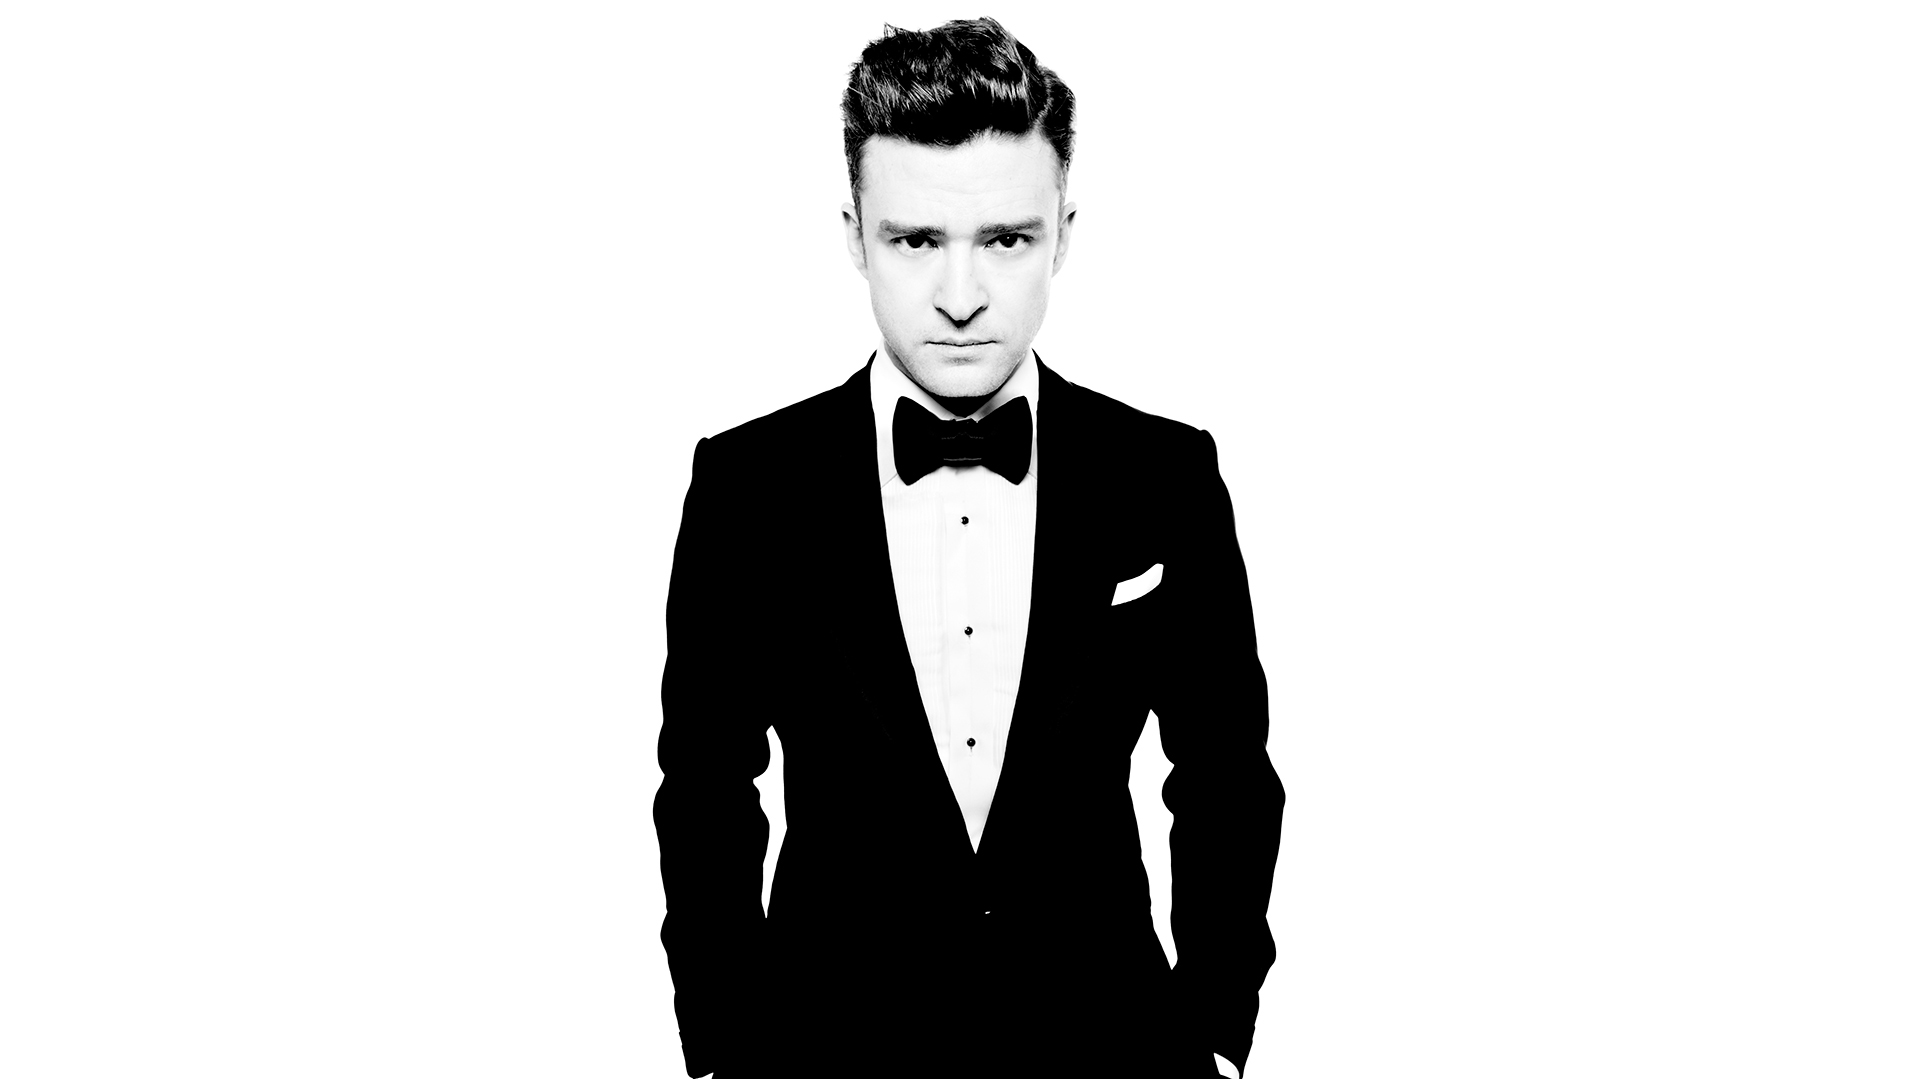 Justin Timberlake's new album, The 20/20 Experience, is out now. (Courtesy of the artist)